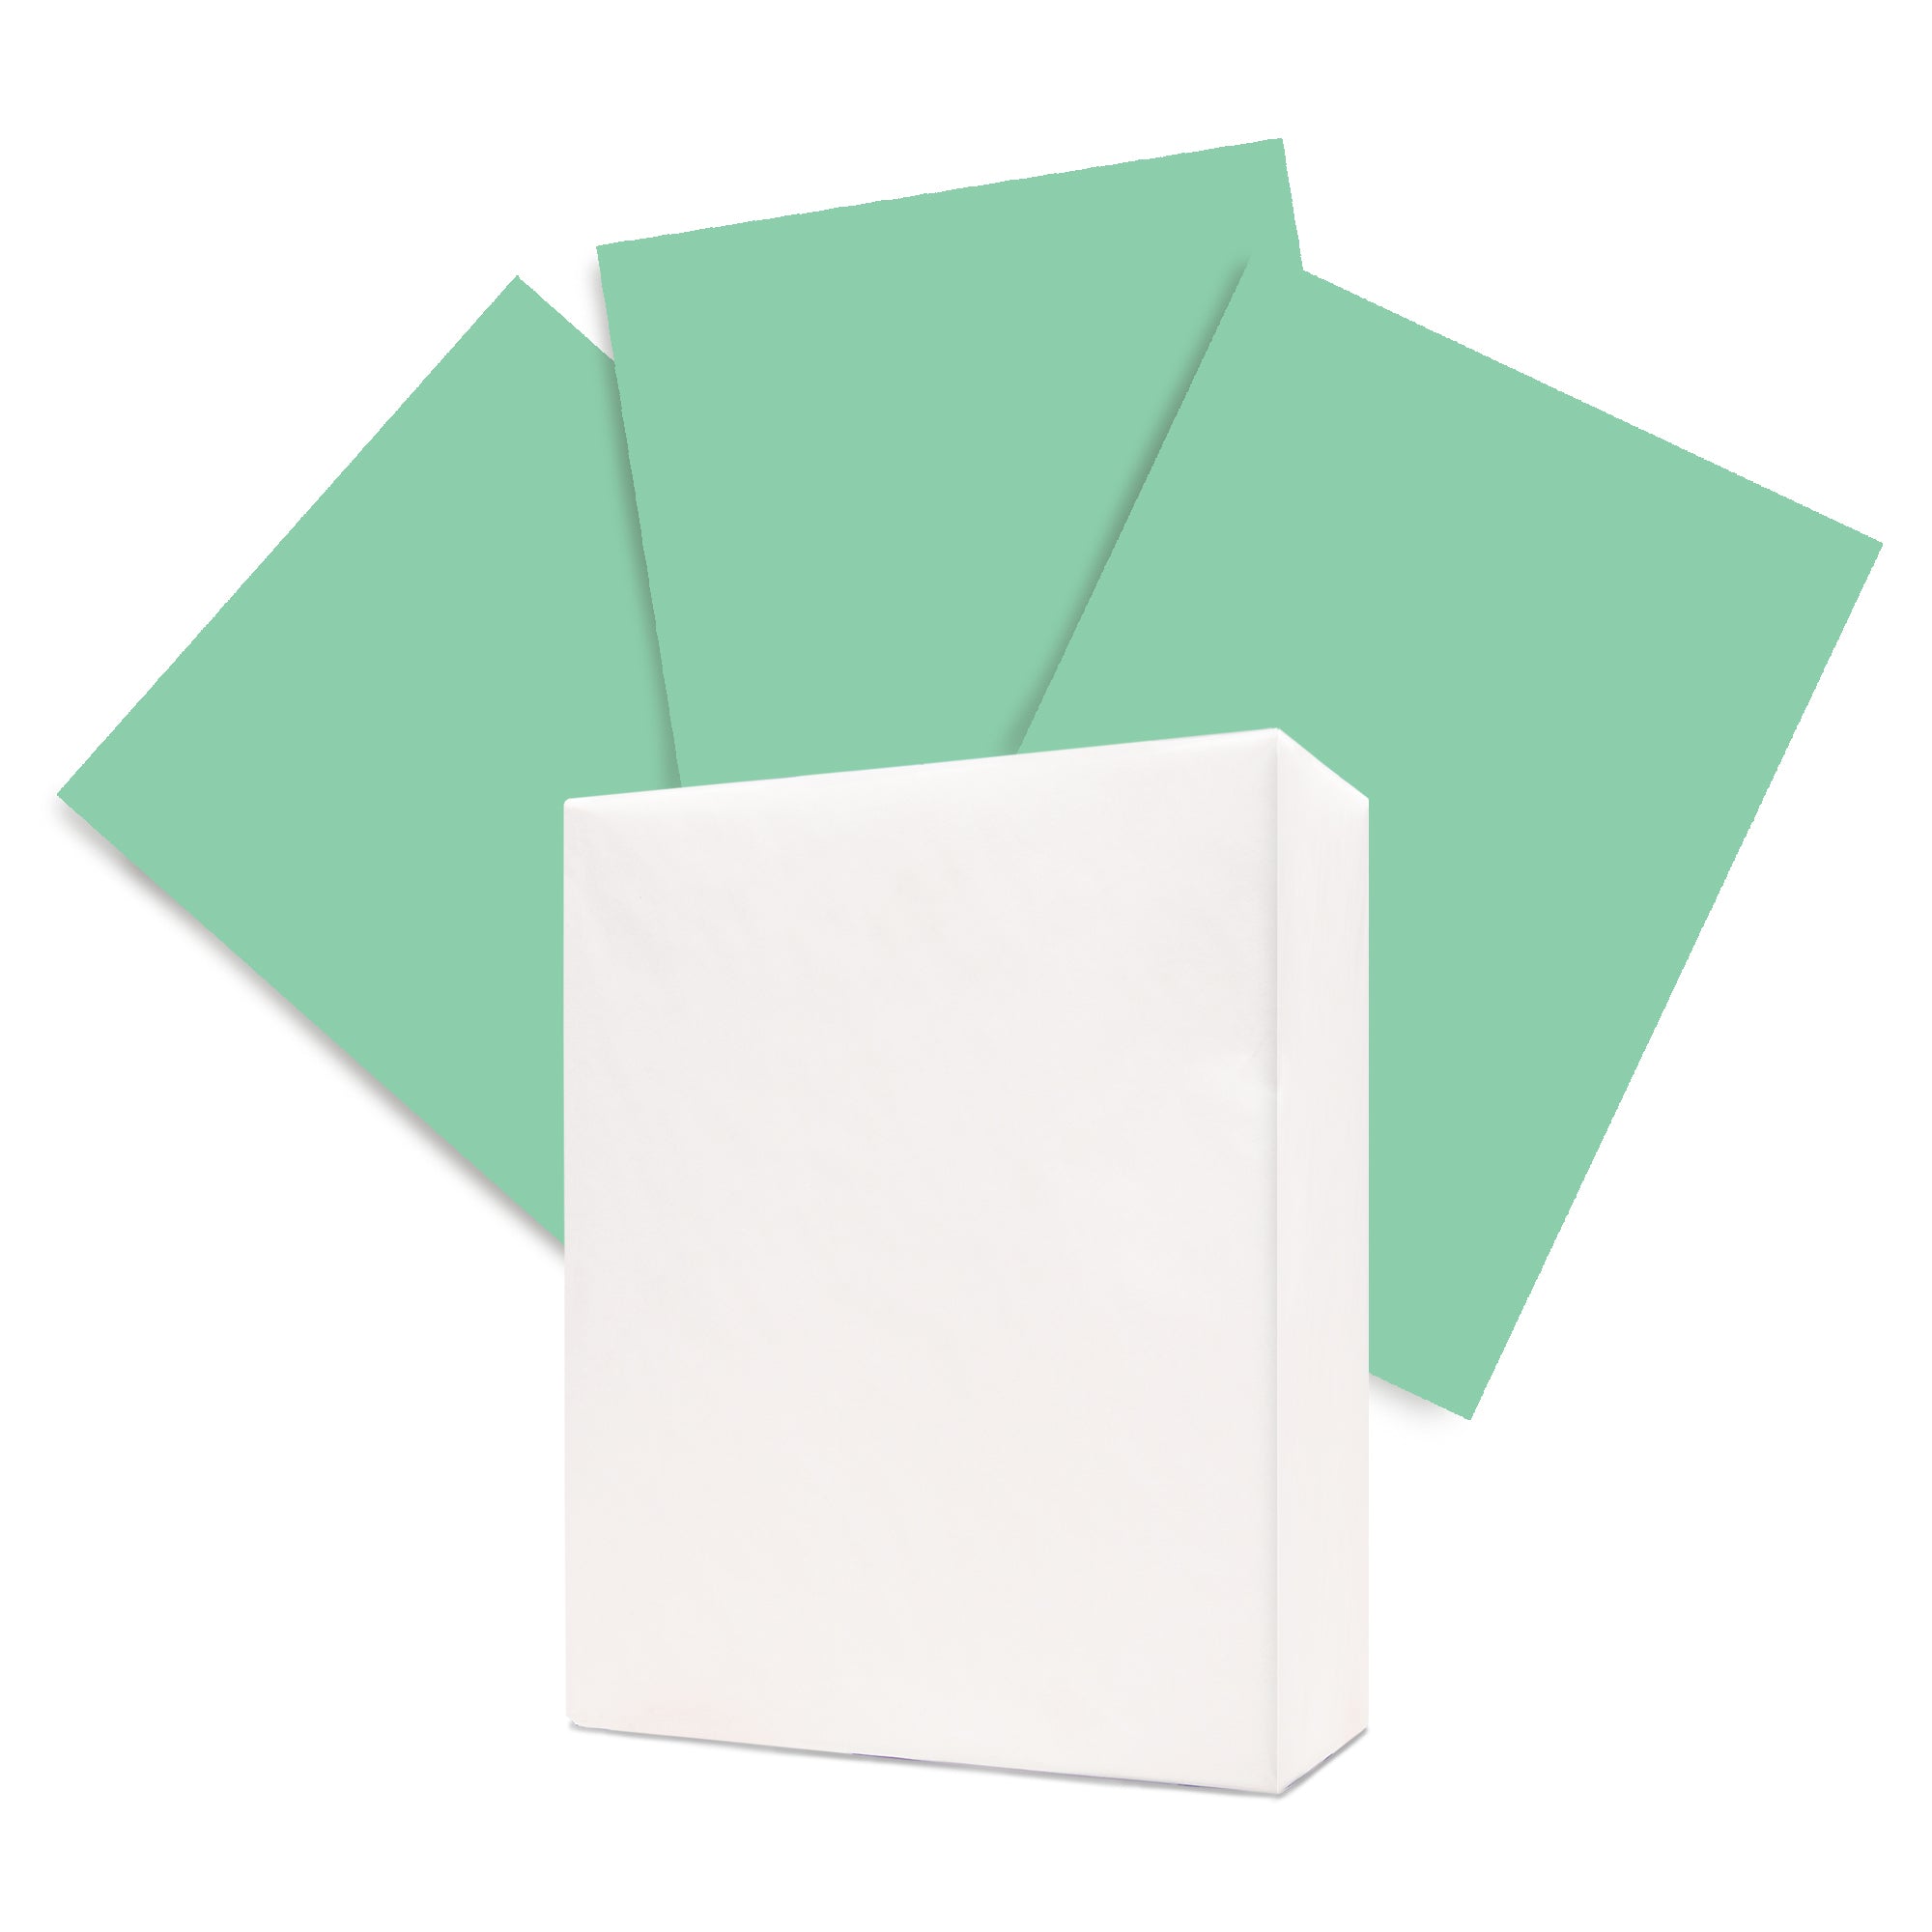 MECCANIXITY 25 Sheets Colored Copy Paper 8 1/2 Inch Printer Paper  22lb/80gsm Emerald Green for Office Printing, Document Copying,  Invitations, Forms